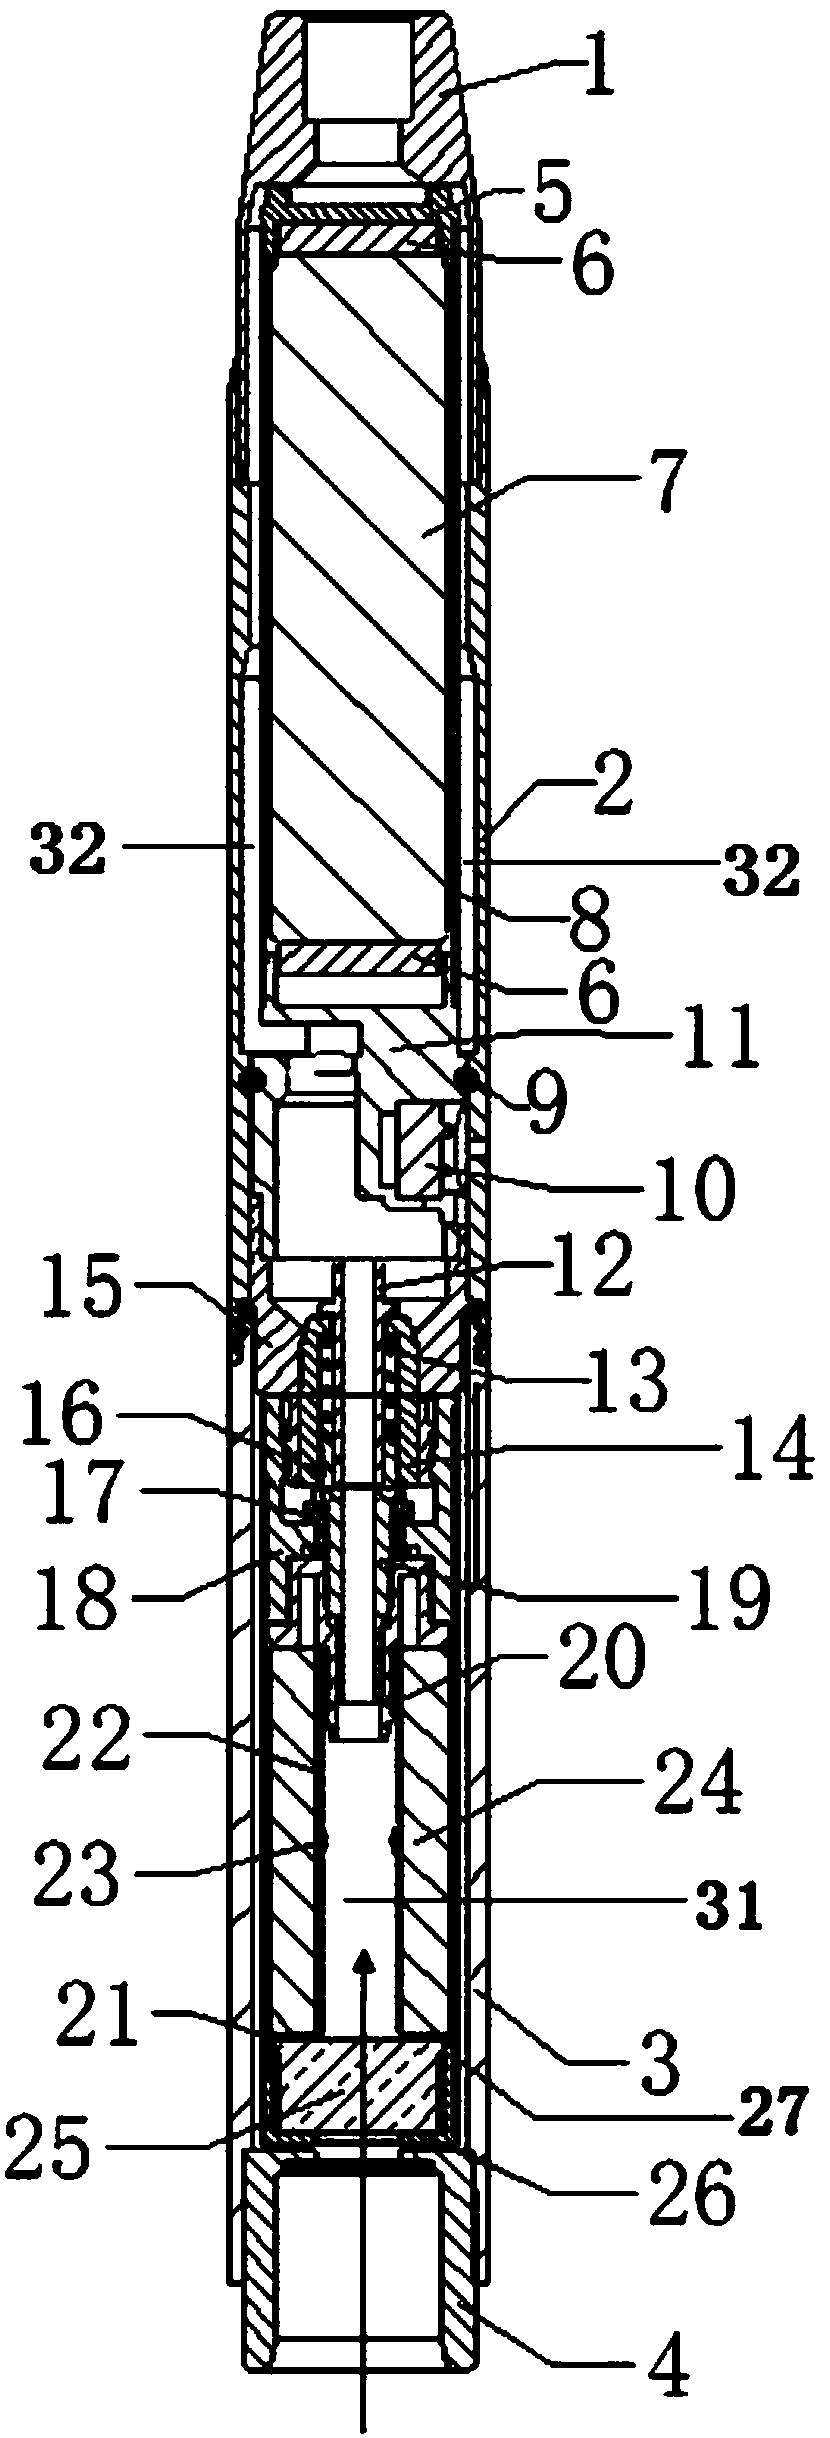 Double-filter-cavity tar-reducing electronic cigarette